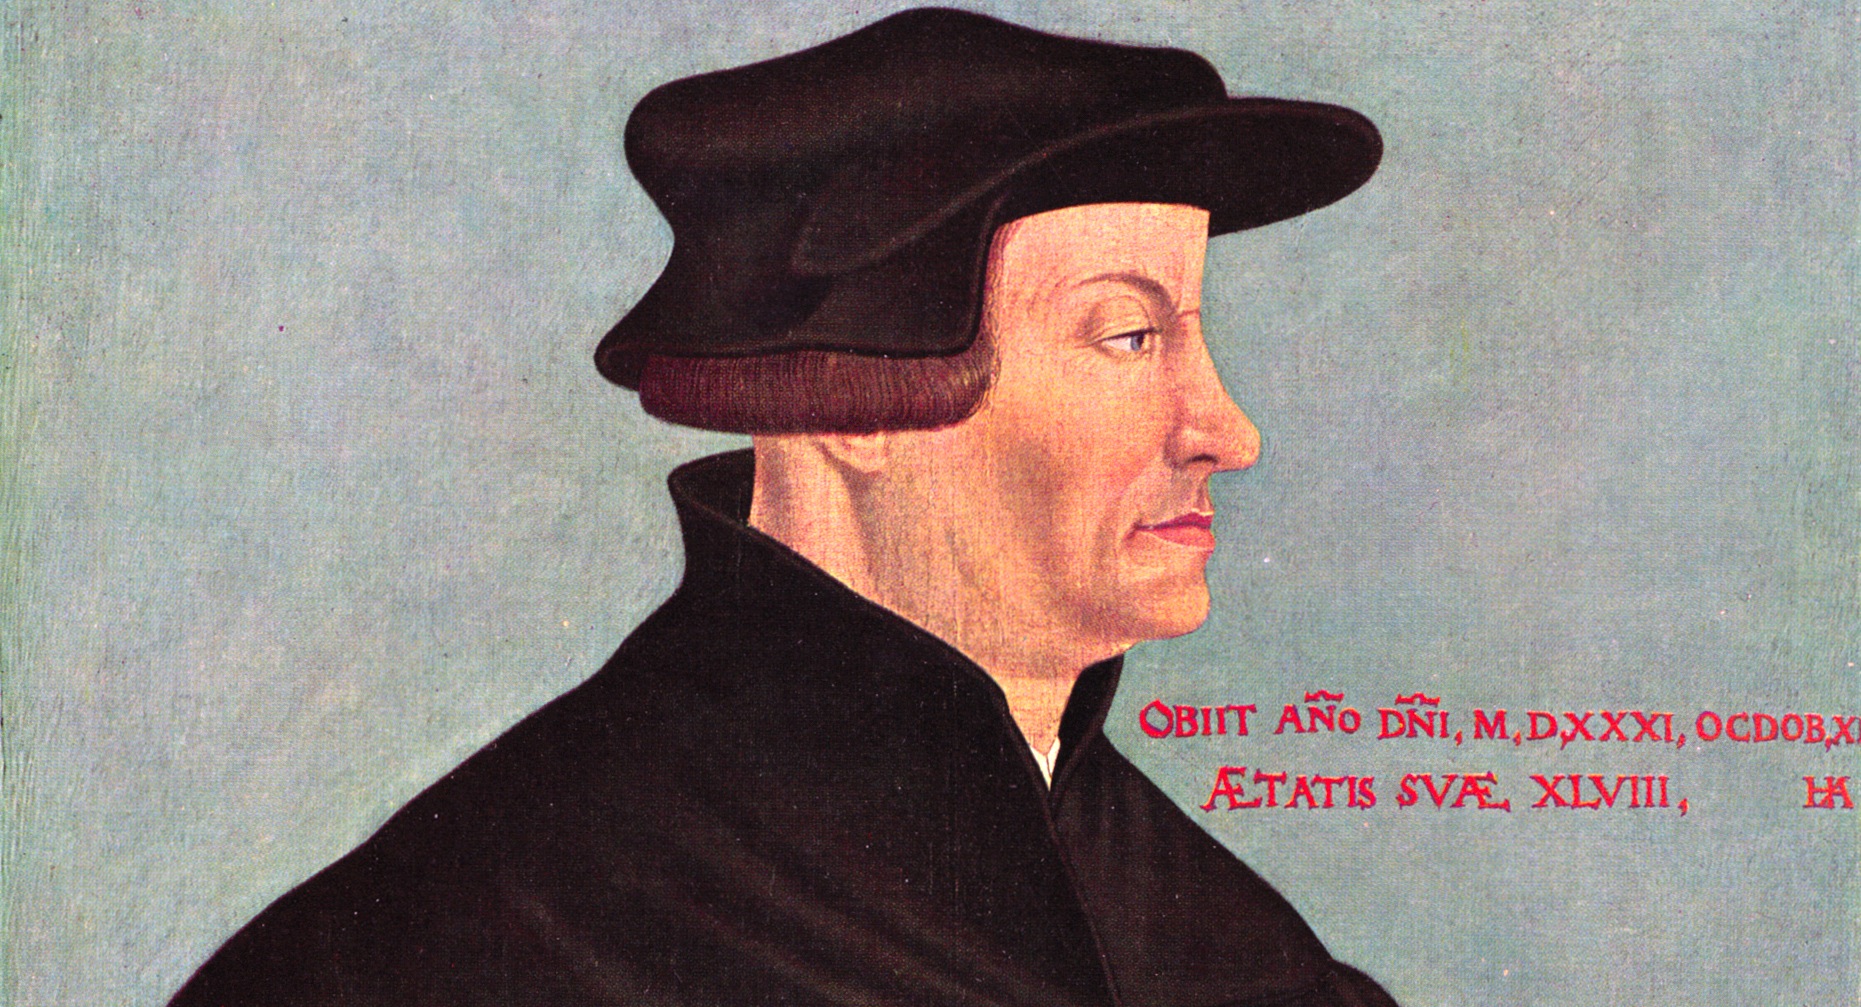 protestant founders ulrich zwingli 1484 1531 the protestant reformation